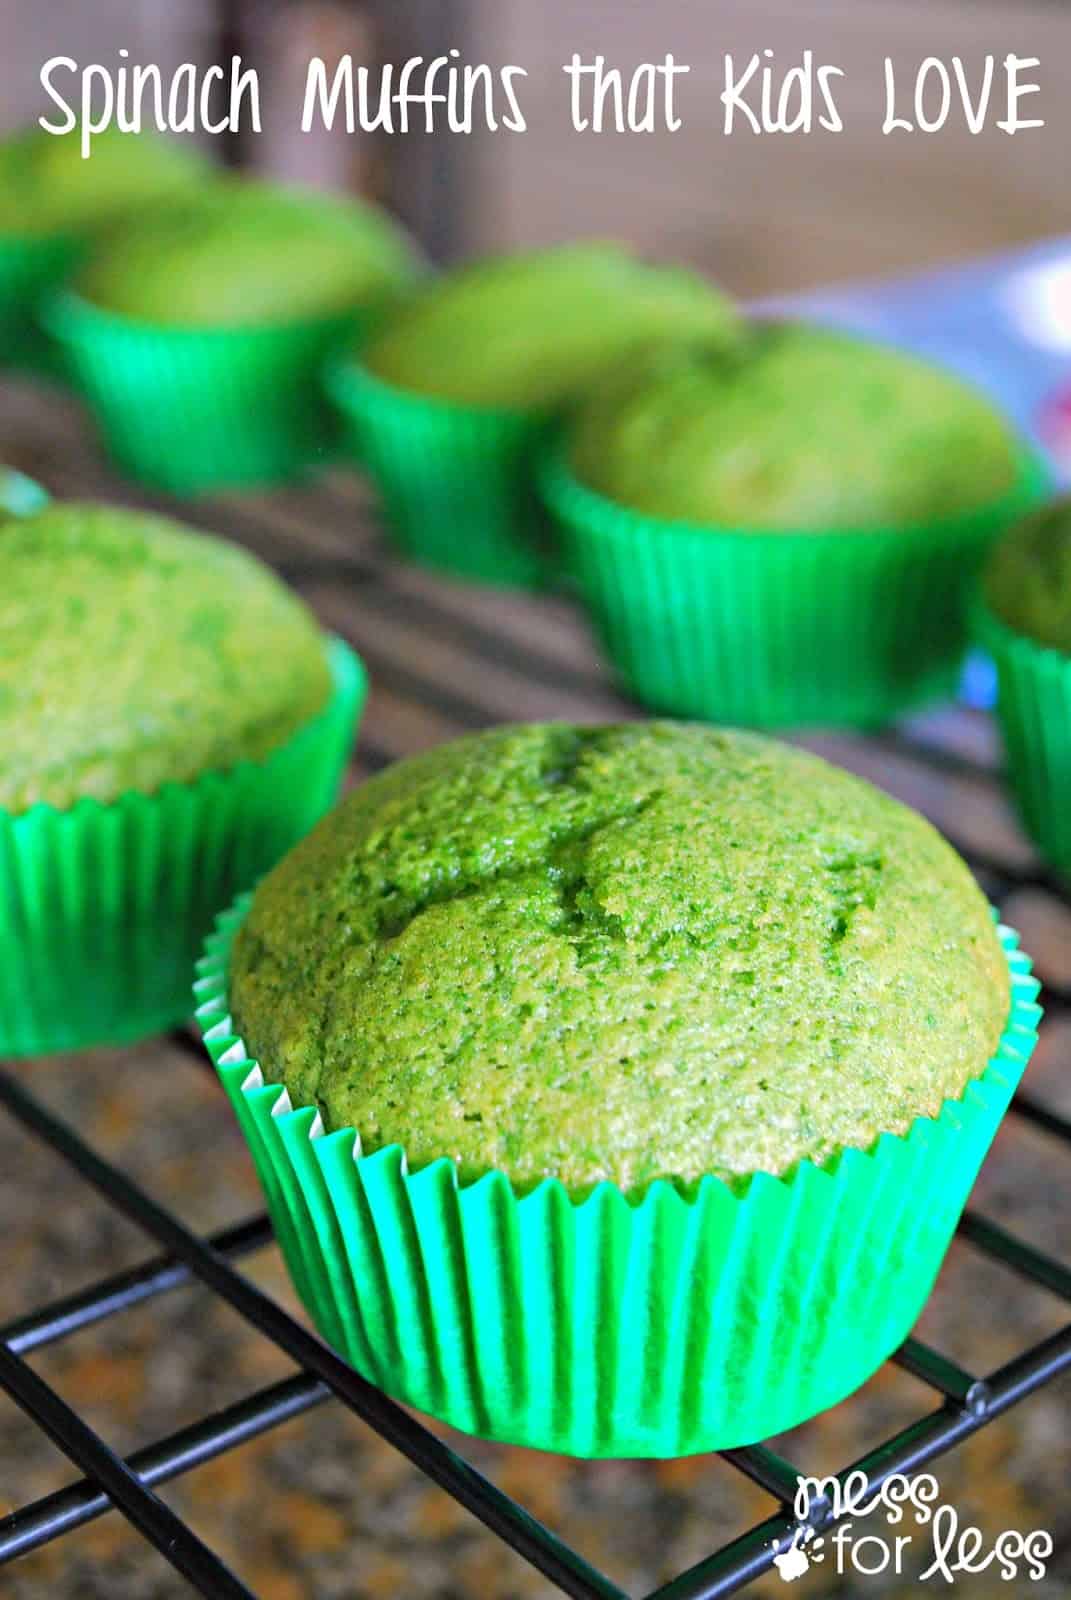 Spinach Muffin Recipe - this simple recipe is a great way to get veggies into your child's diet. The best part is that kids (and adults) LOVE it!